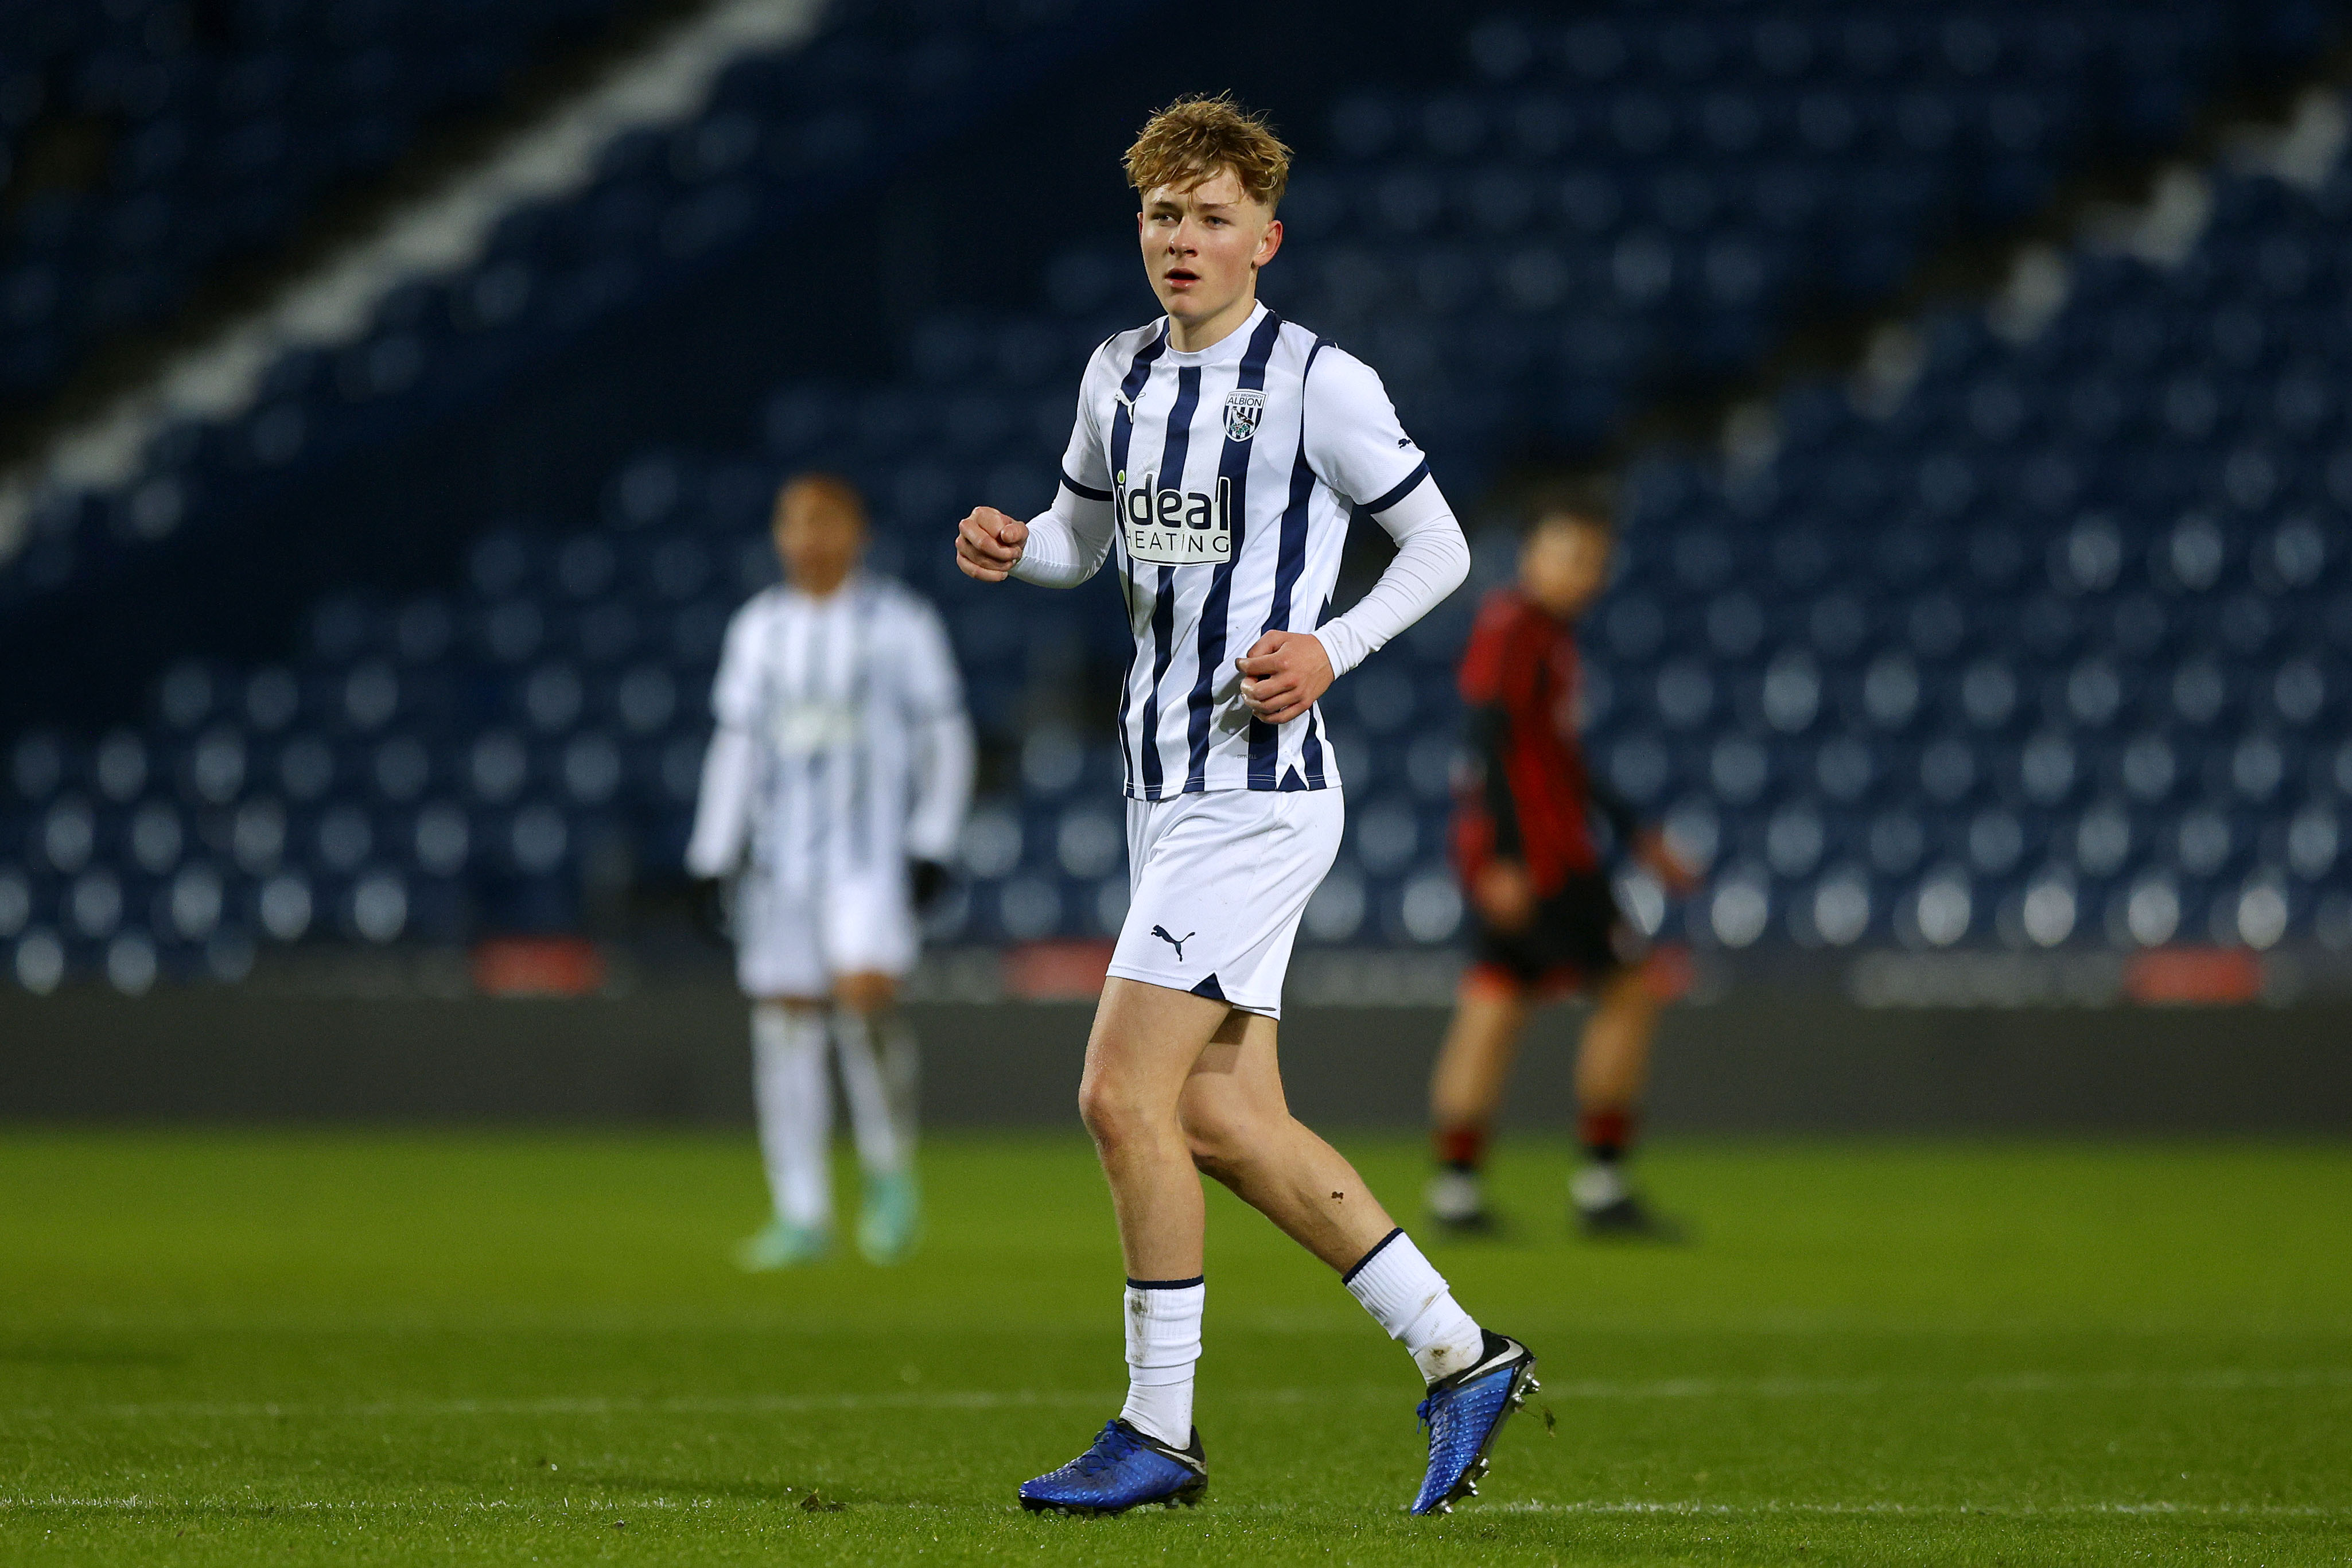 Ollie Bostock in action for Albion's U18 side at The Hawthorns in the FA Youth Cup against AFC Bournemouth 